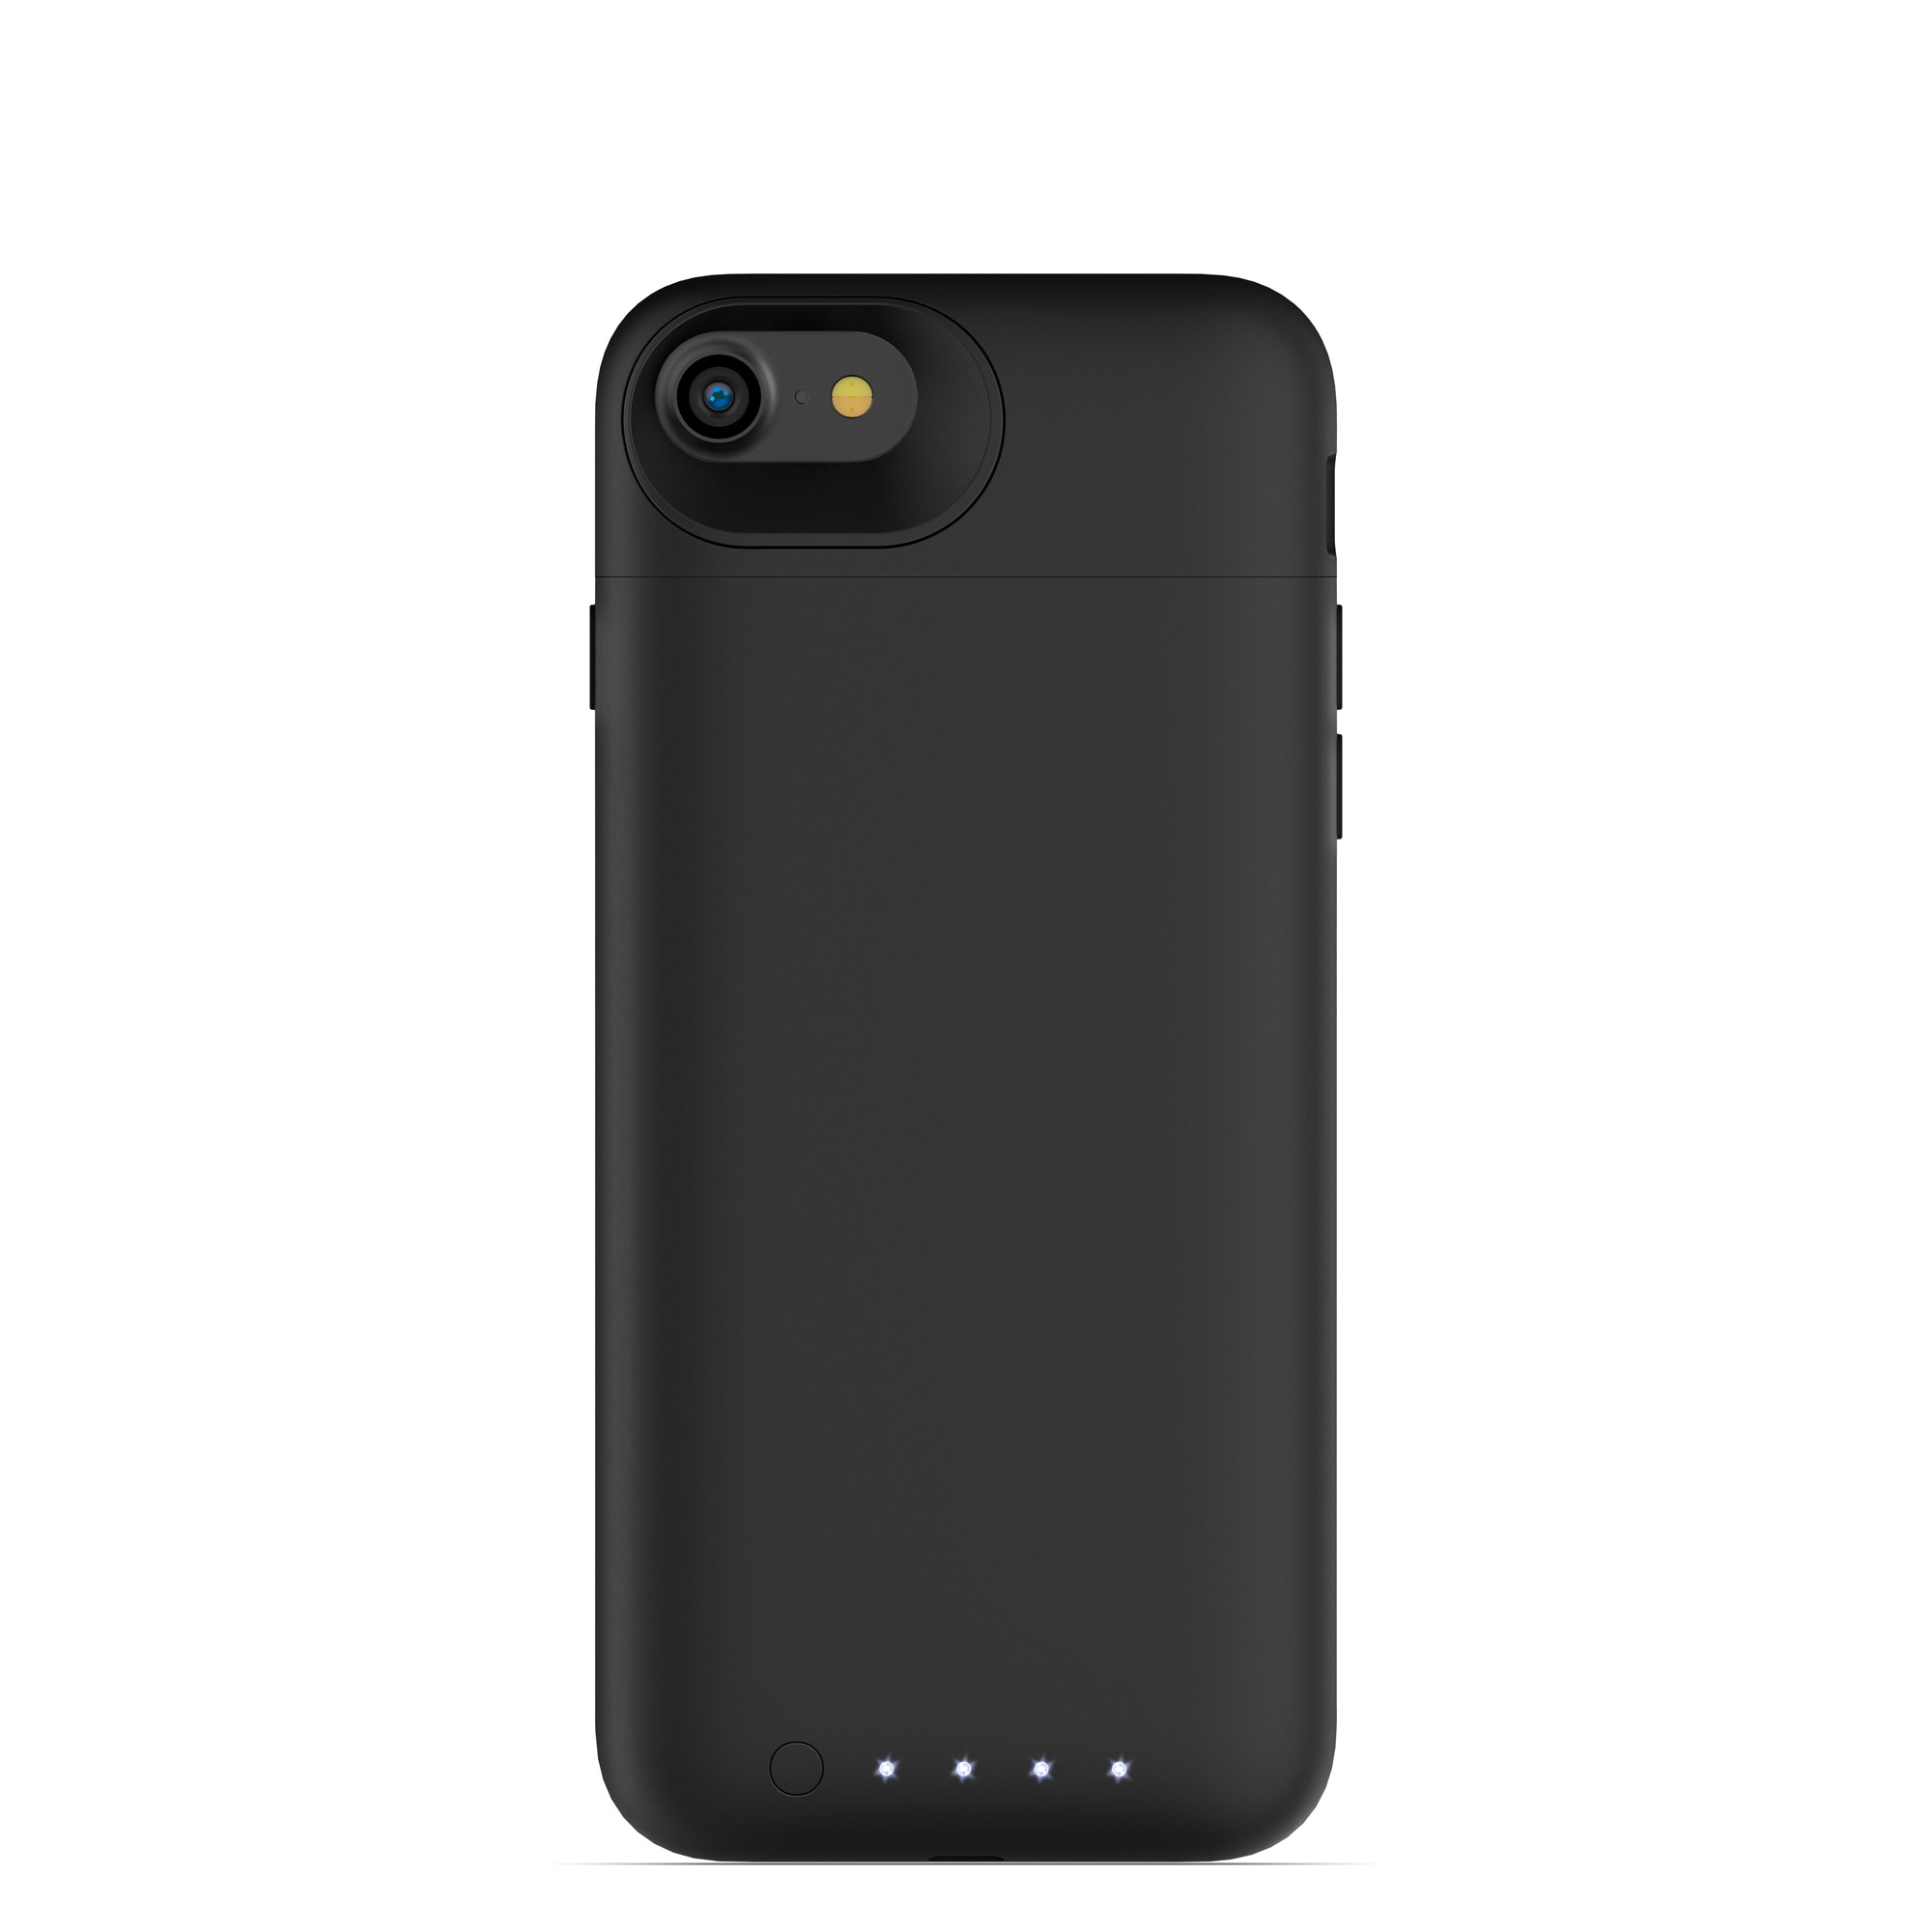 mophie juice pack air for iPhone 8/7 | SHOP FOCAL